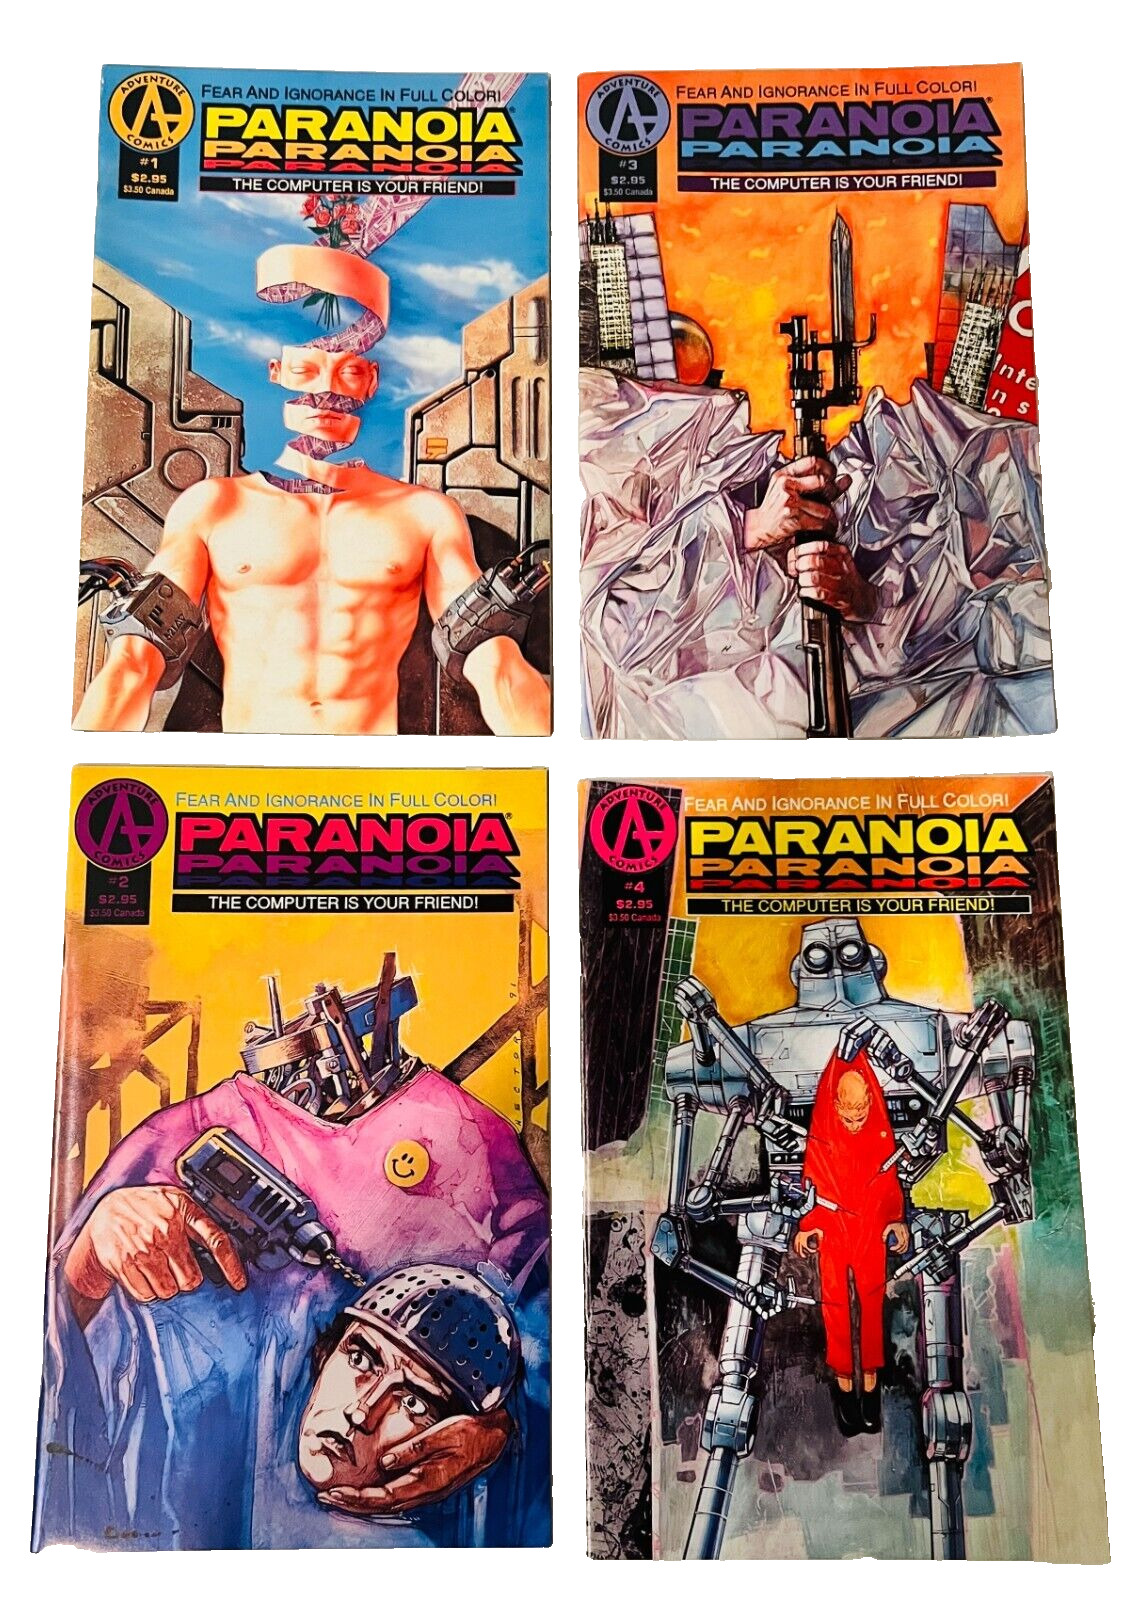 PARANOIA THE COMPUTER IS YOUR FRIEND #1-4 COMPLETE RUN ADVENTURE 1991 VF+